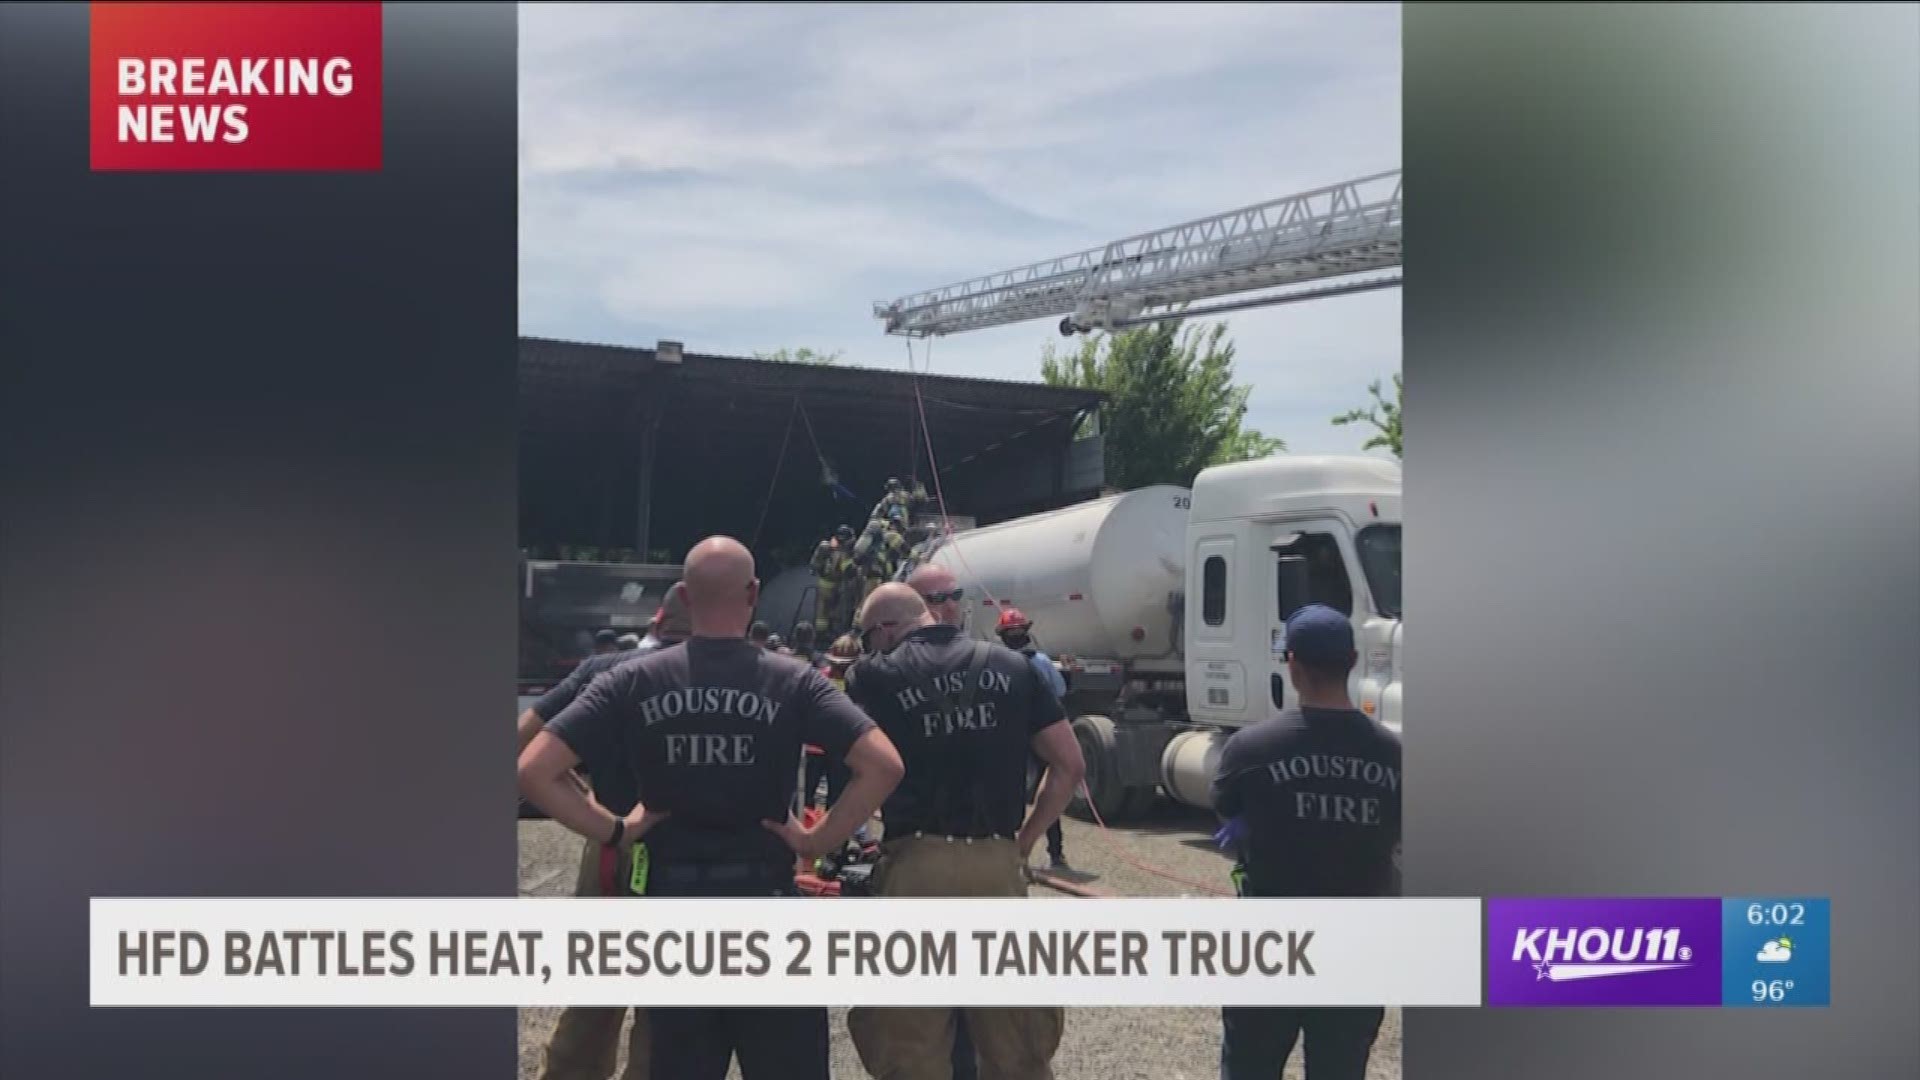 Firefighters battled the extreme temperatures as they rescued two people from a tar-filled tanker truck off Howard Drive Saturday afternoon.